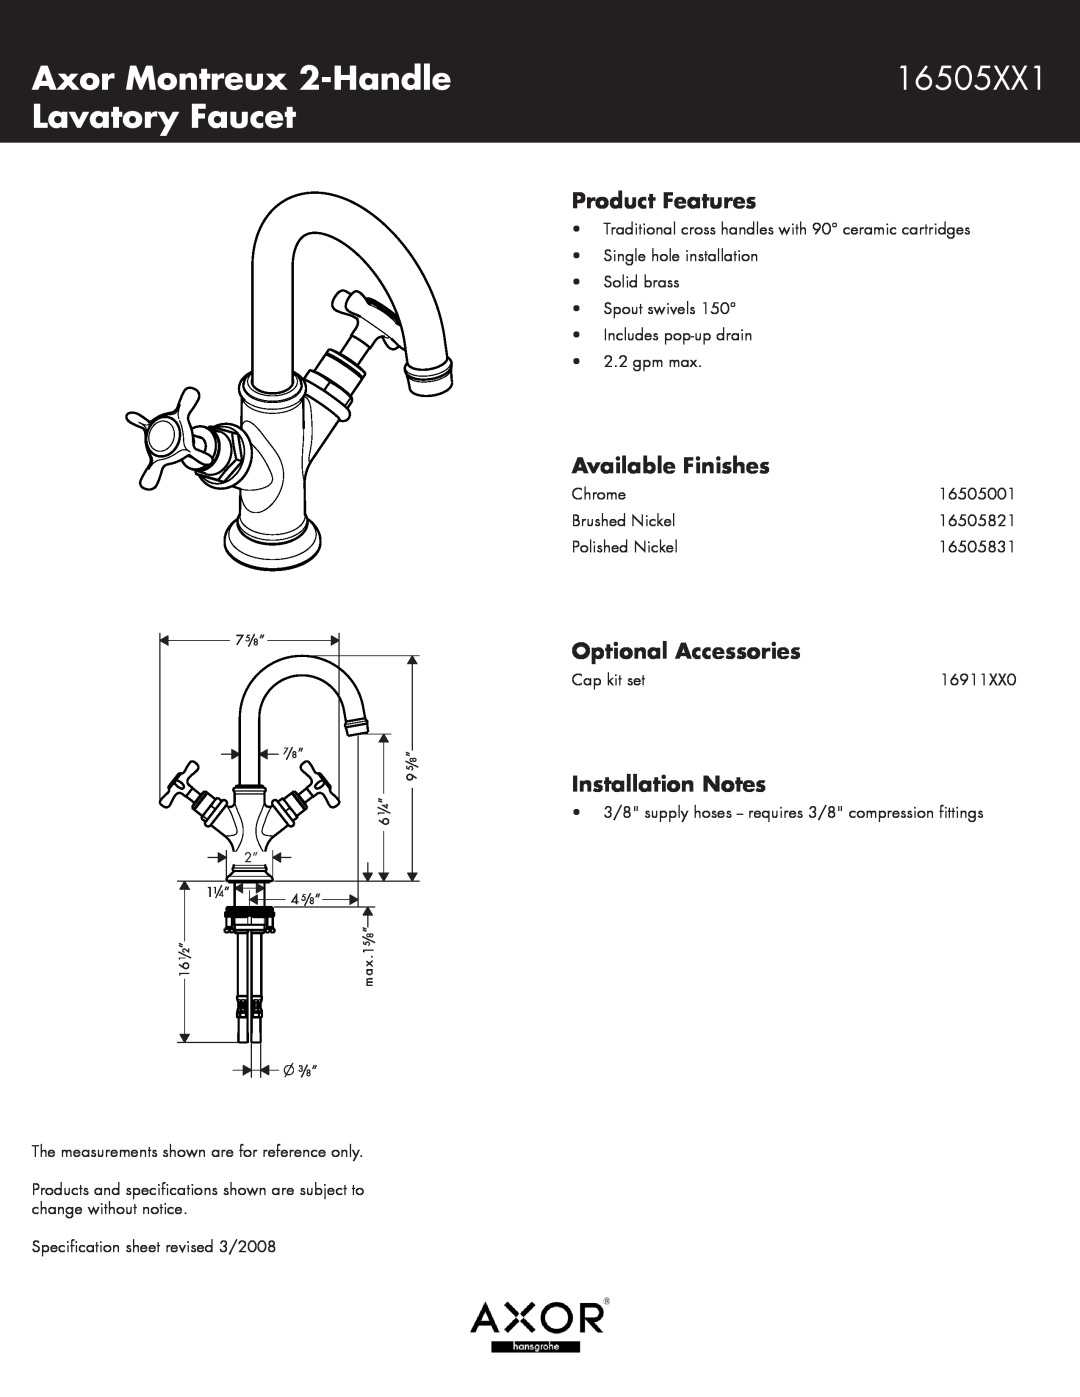 Axor 16505831 specifications Axor Montreux 2-Handle, 16505XX1, Lavatory Faucet, Product Features, Available Finishes 